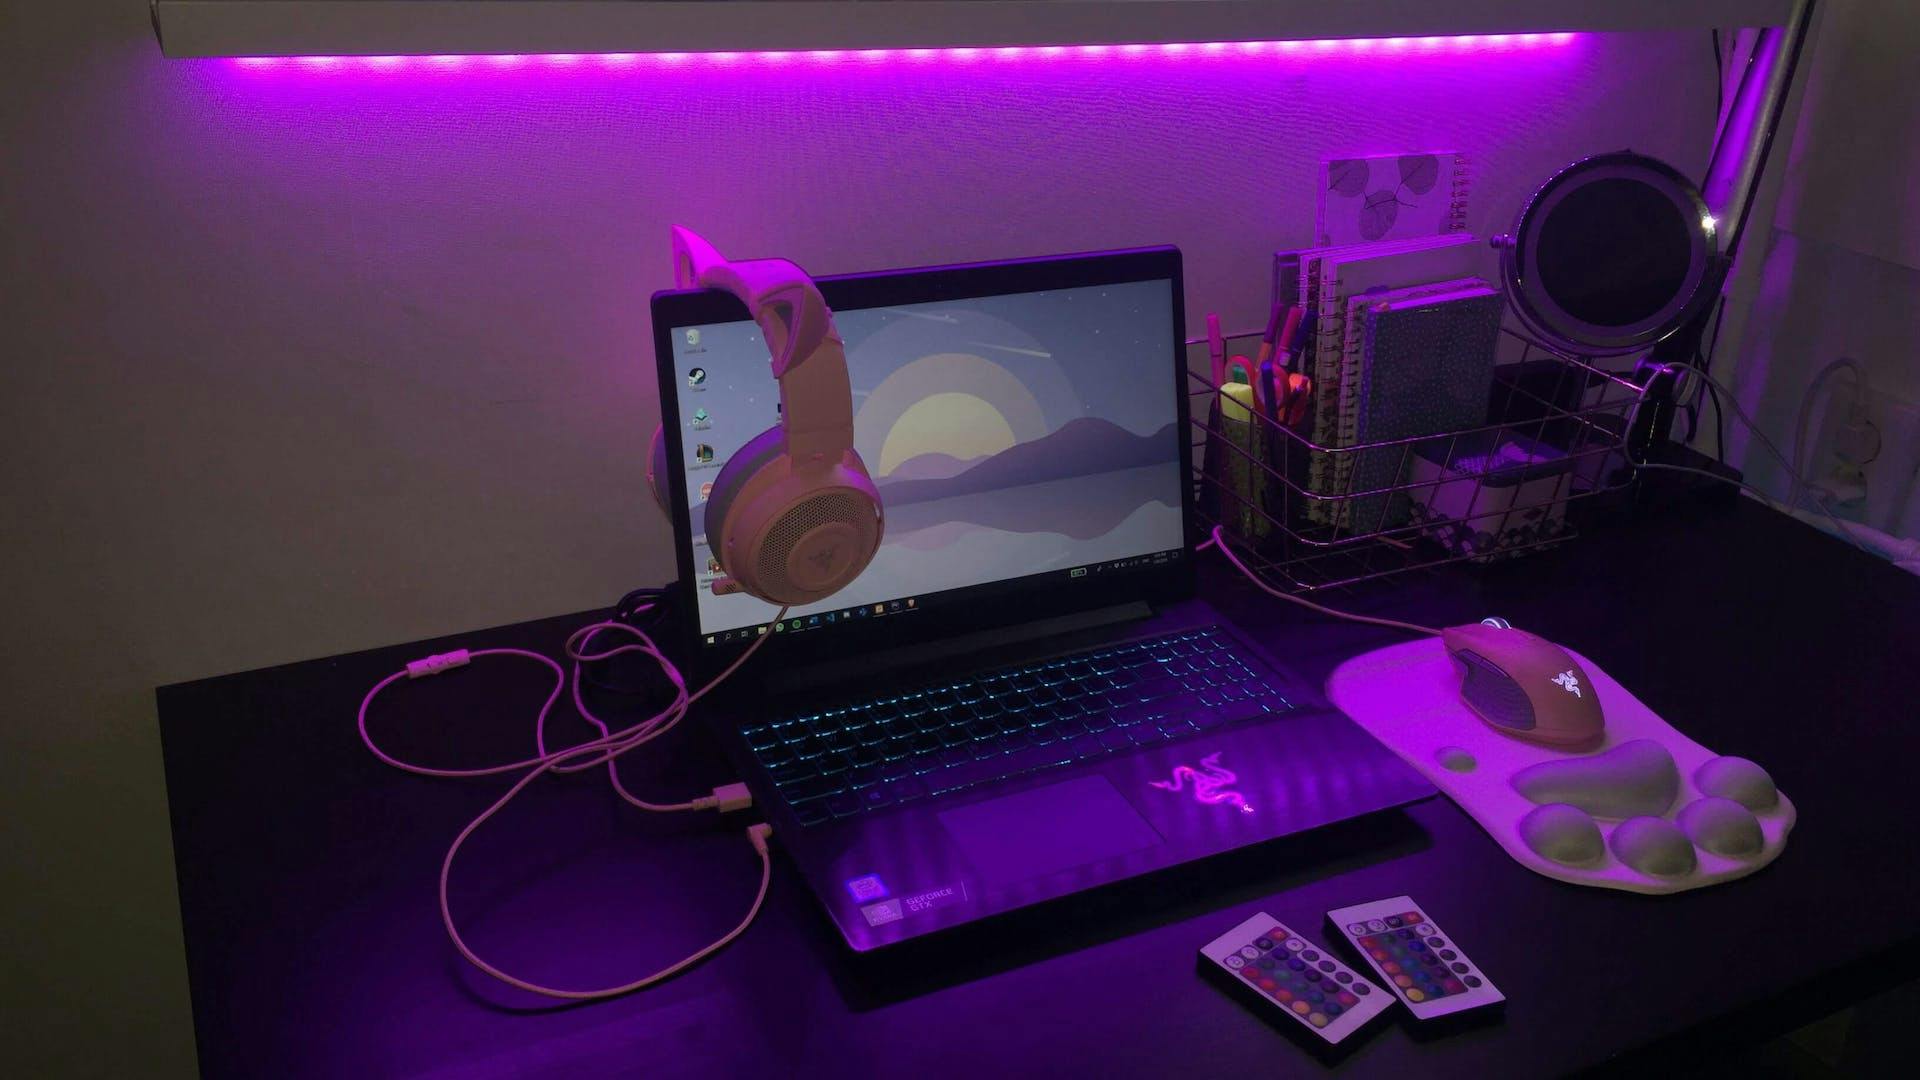 On a desk in a purple LED lit gaming room is a gaming laptop, gaming mouse and a matching gaming headset over the screen